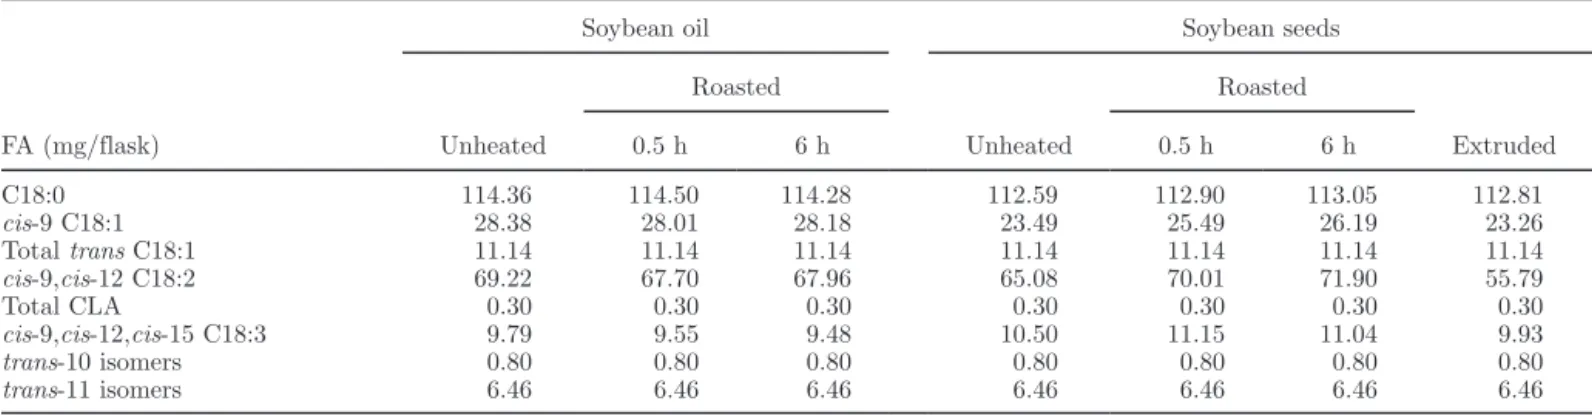 Table 2. Initial amount (mg/flask) of the major FA in the different cultures according to the heating process and roasting duration of soybean  oil and seeds 1